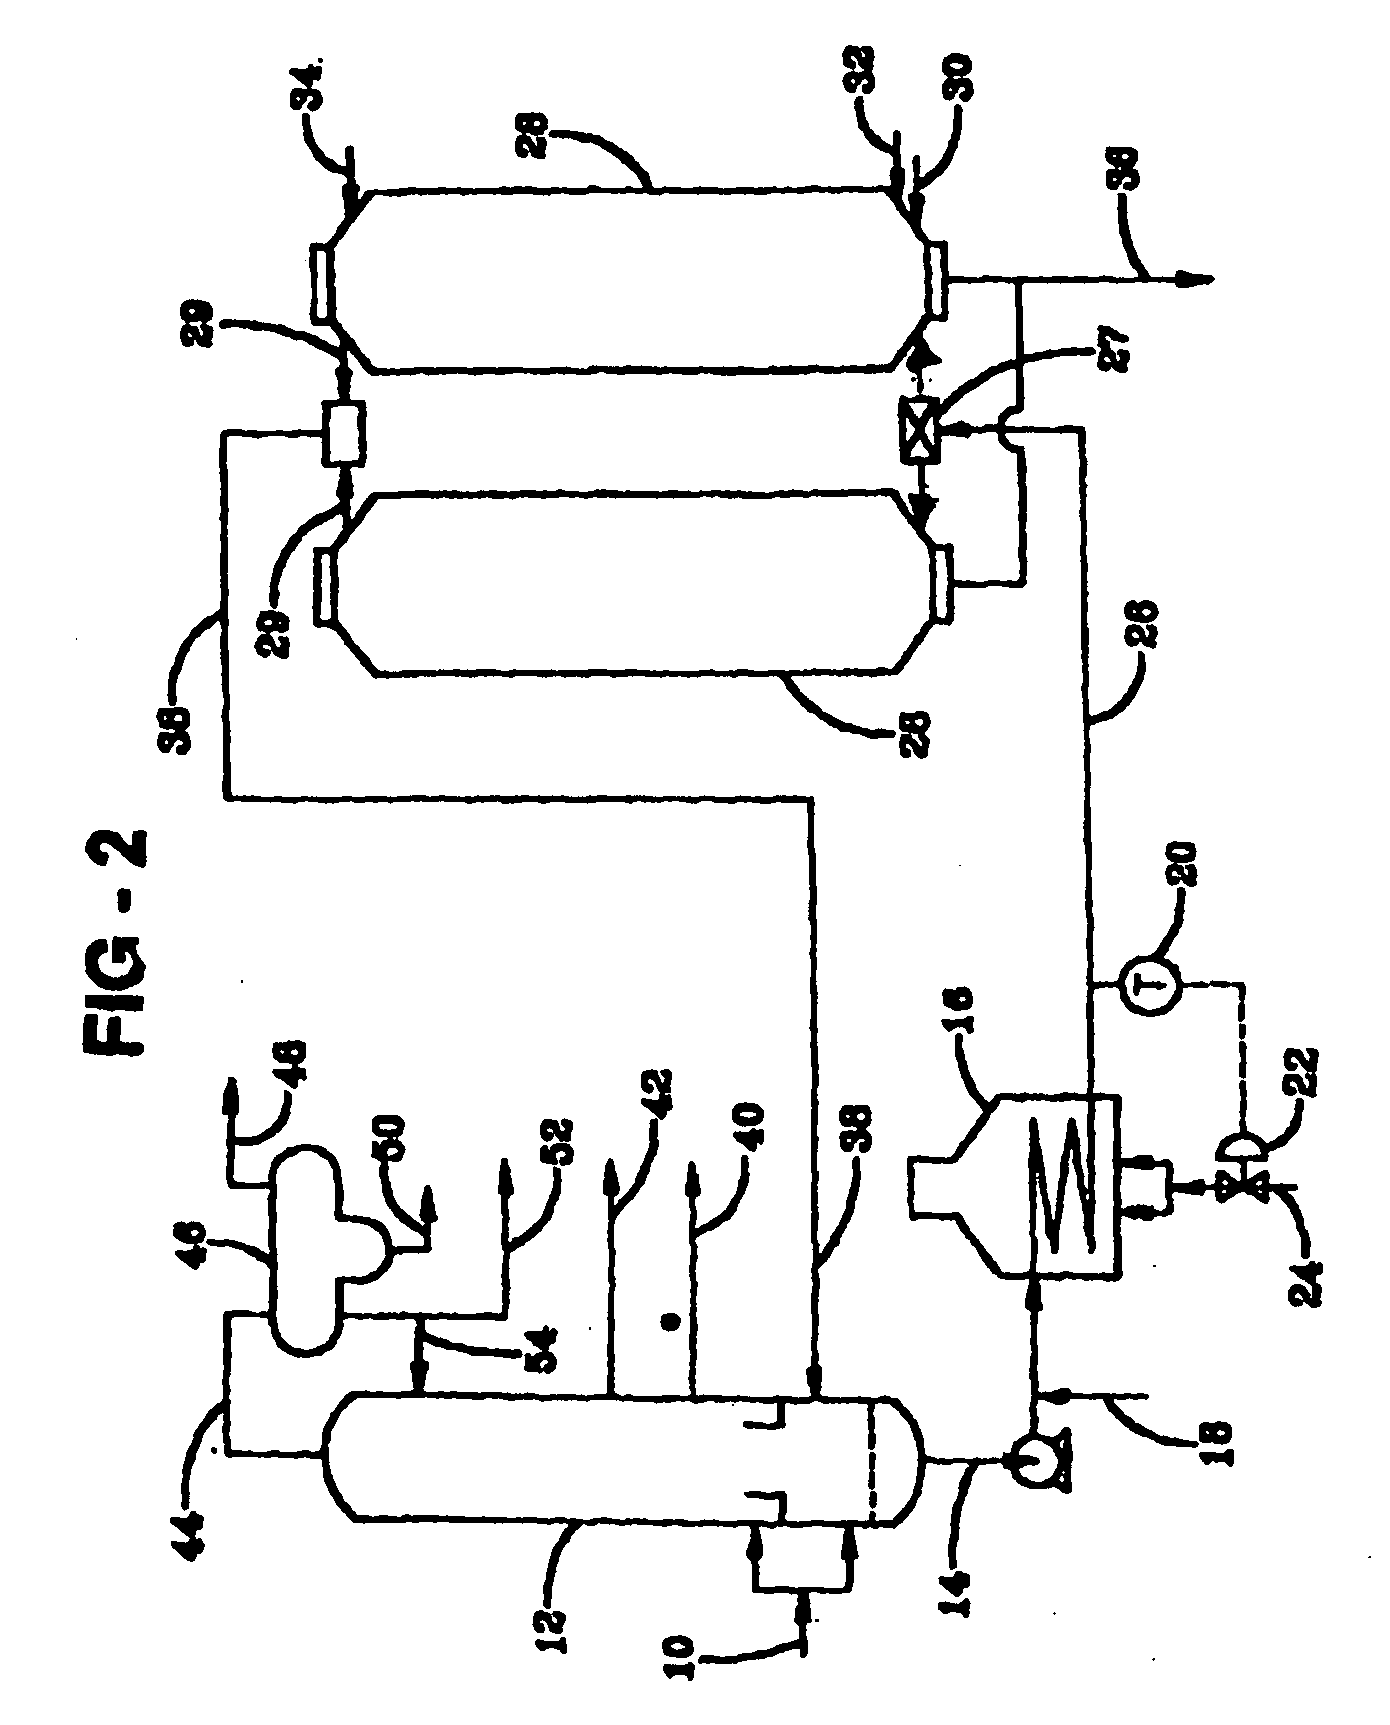 System and Method for Introducing an Additive into a Coking Process to Improve Quality and Yields of Coker Products